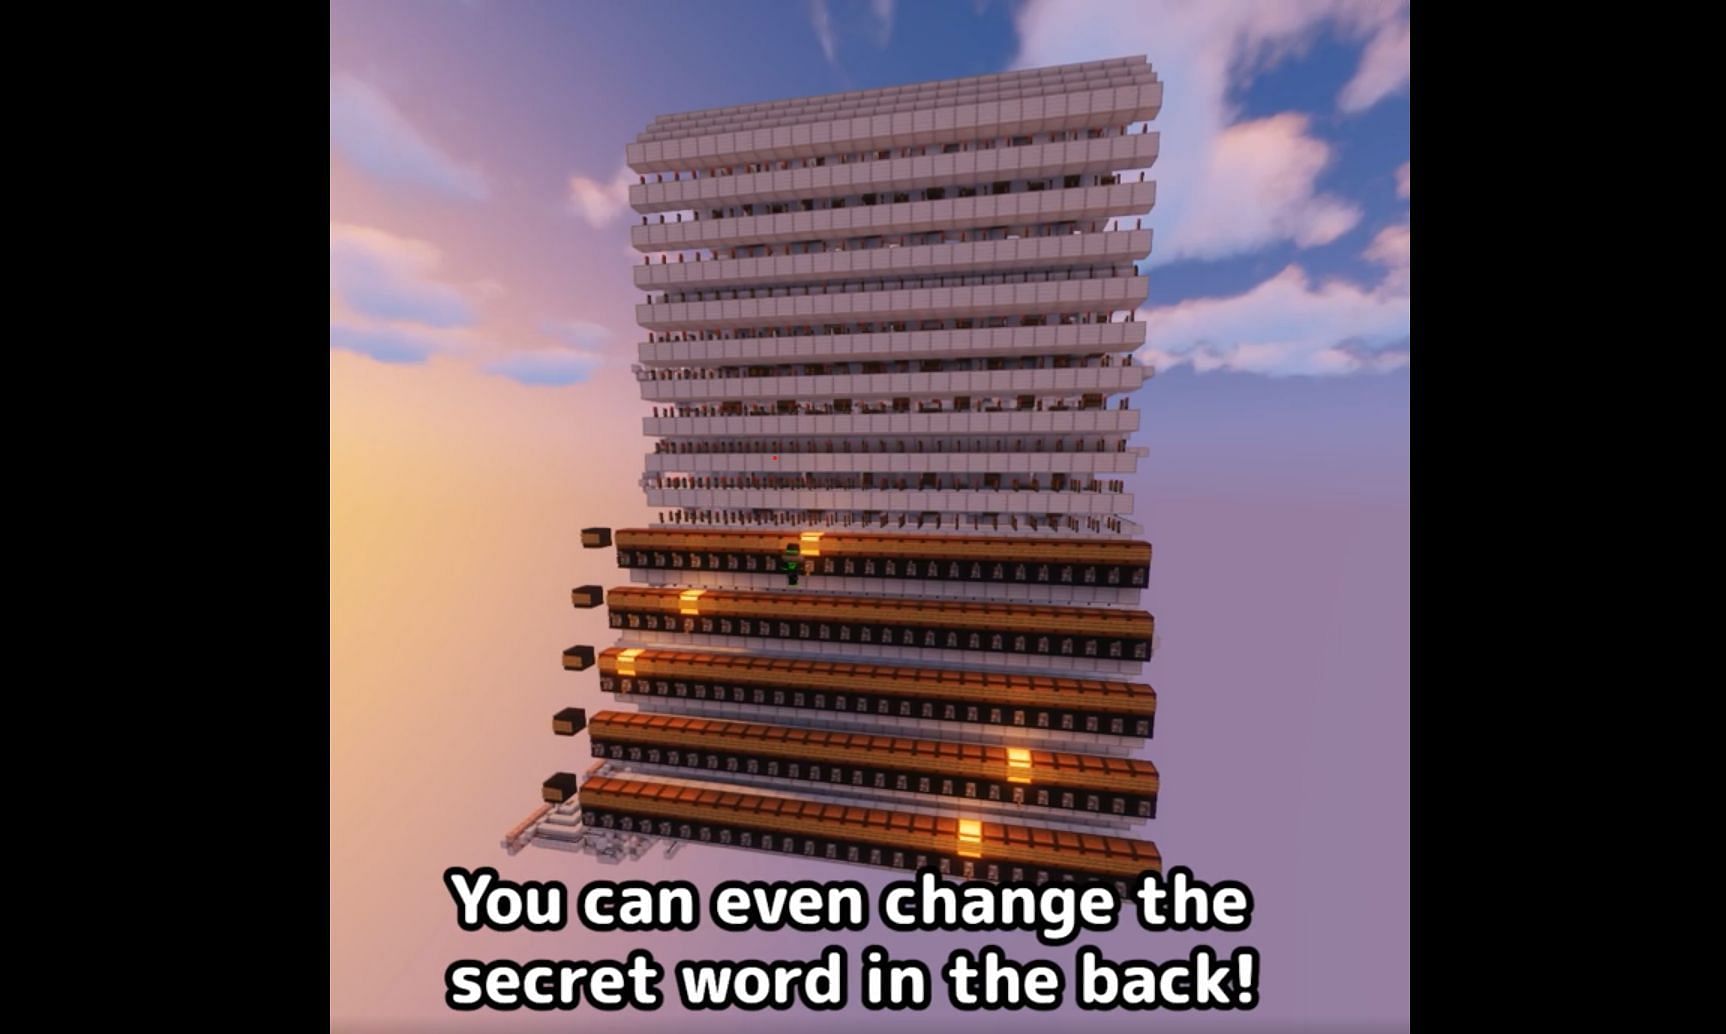 Players can also change the secret word from the back of the machine (Image via u/mattbatwings2 Reddit)